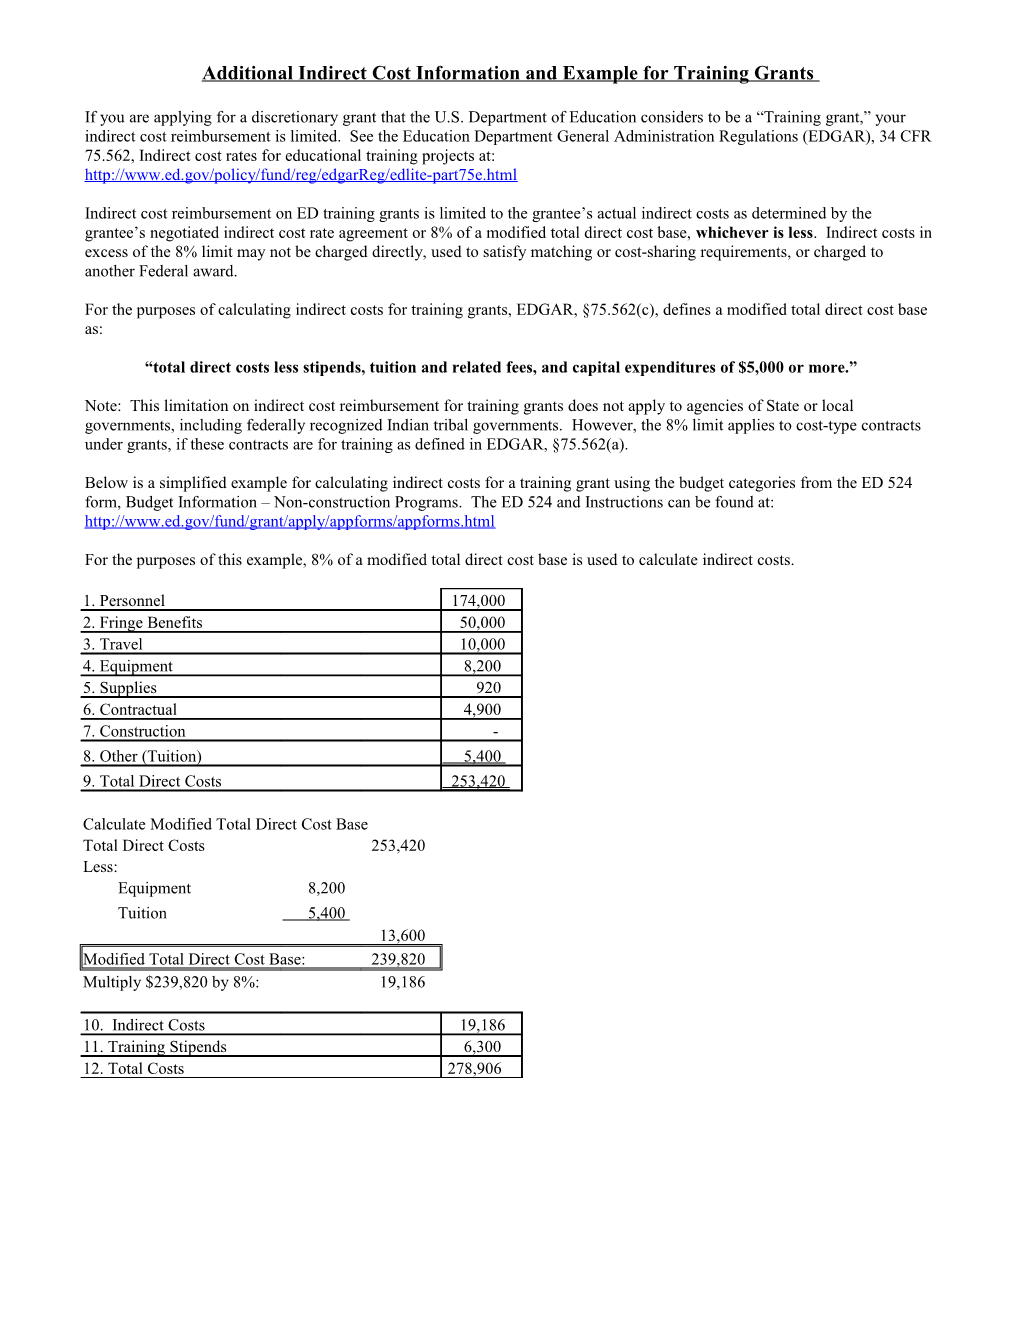 Training Grants Indirect Cost Info and Example for ED Form 524 (MS Word)